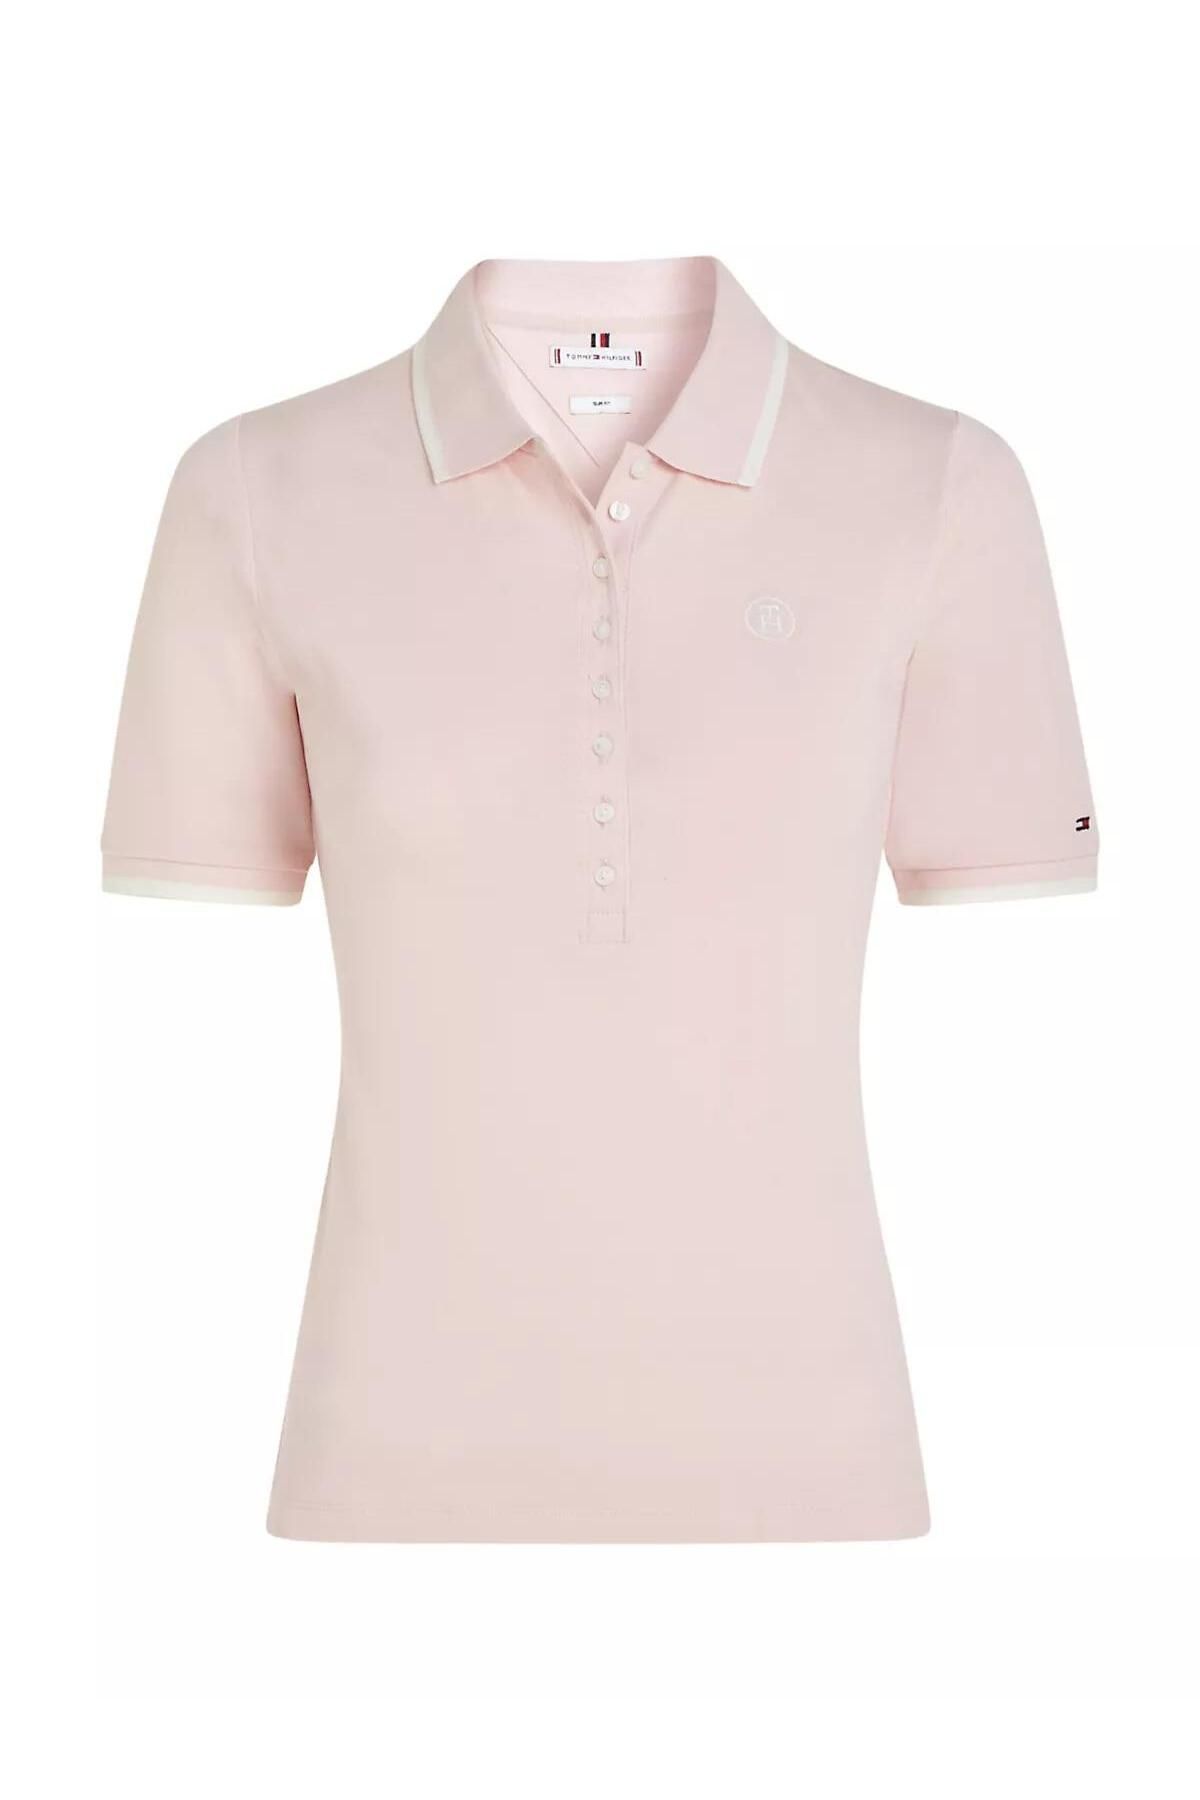 Tommy Hilfiger SLIM SMD TIPPING LYOCELL POLO SS